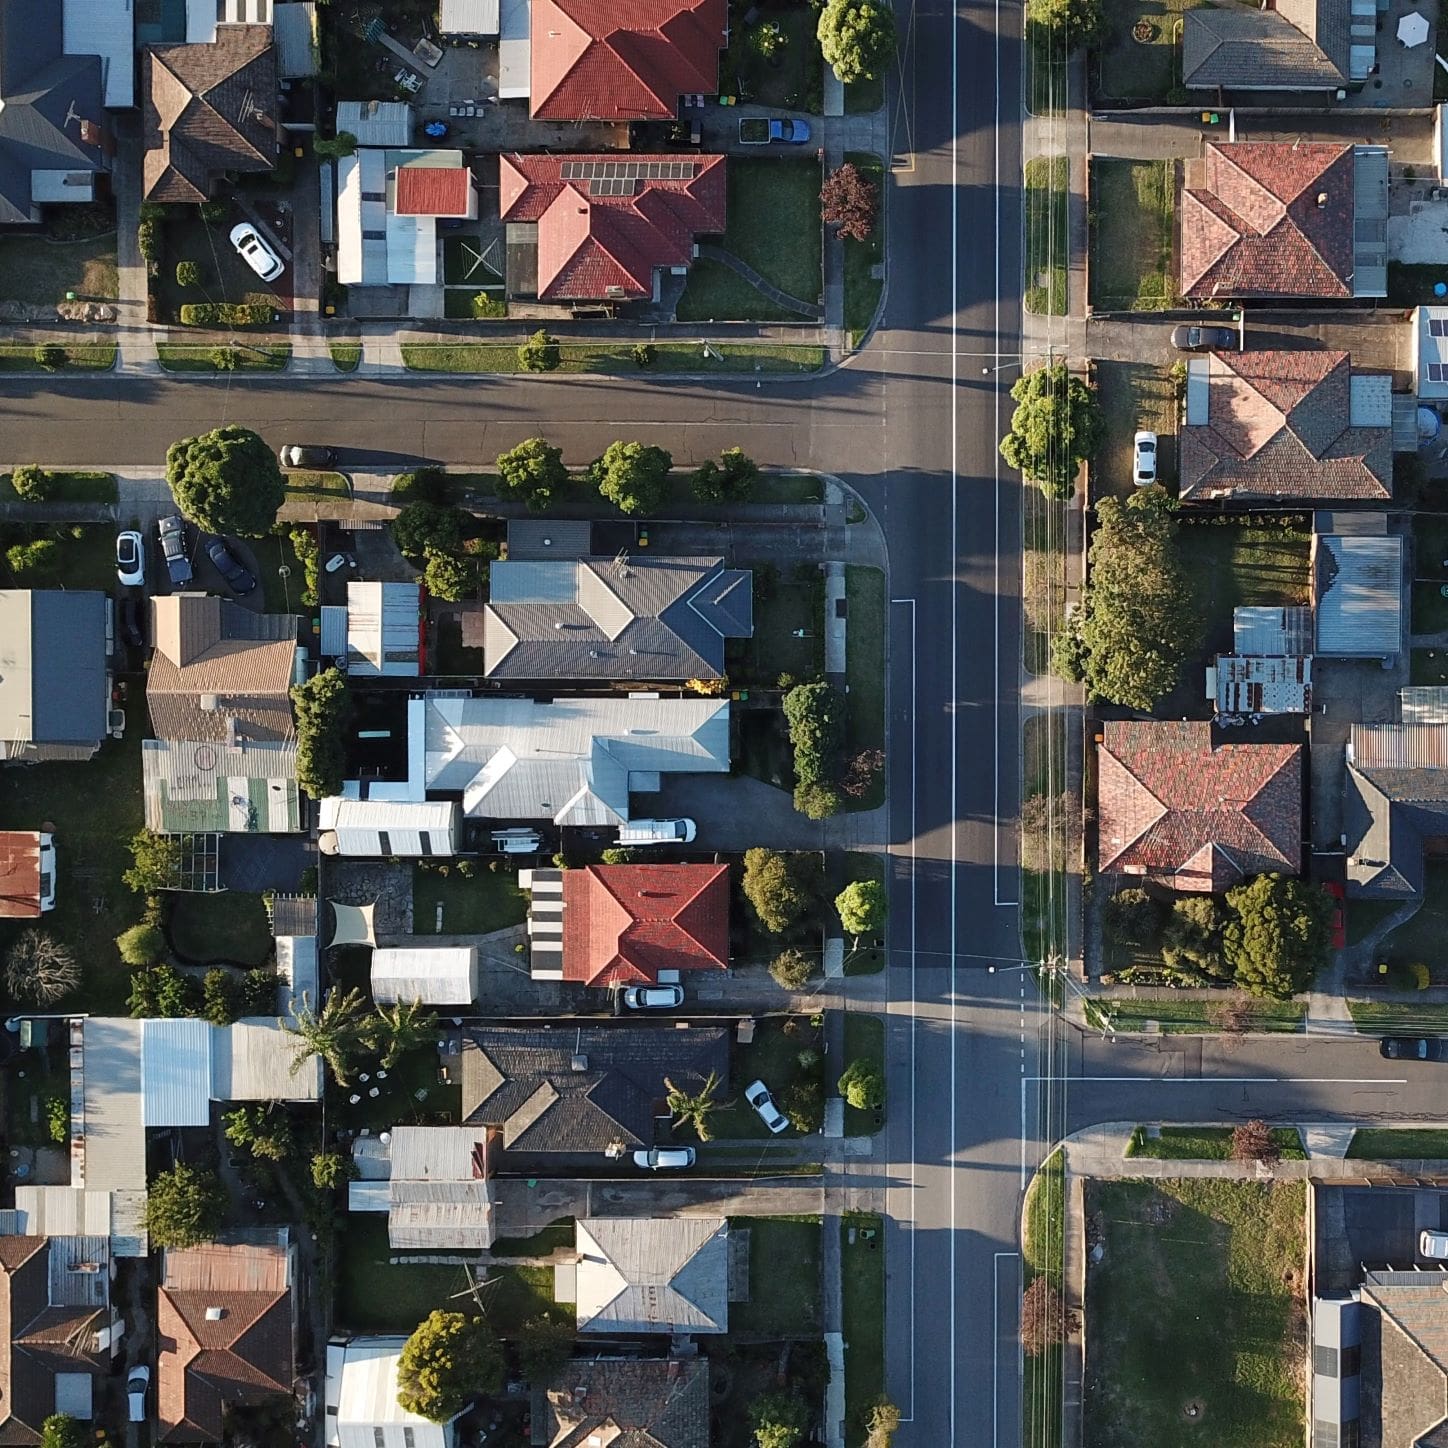 Bird's-eye view of houses and streets